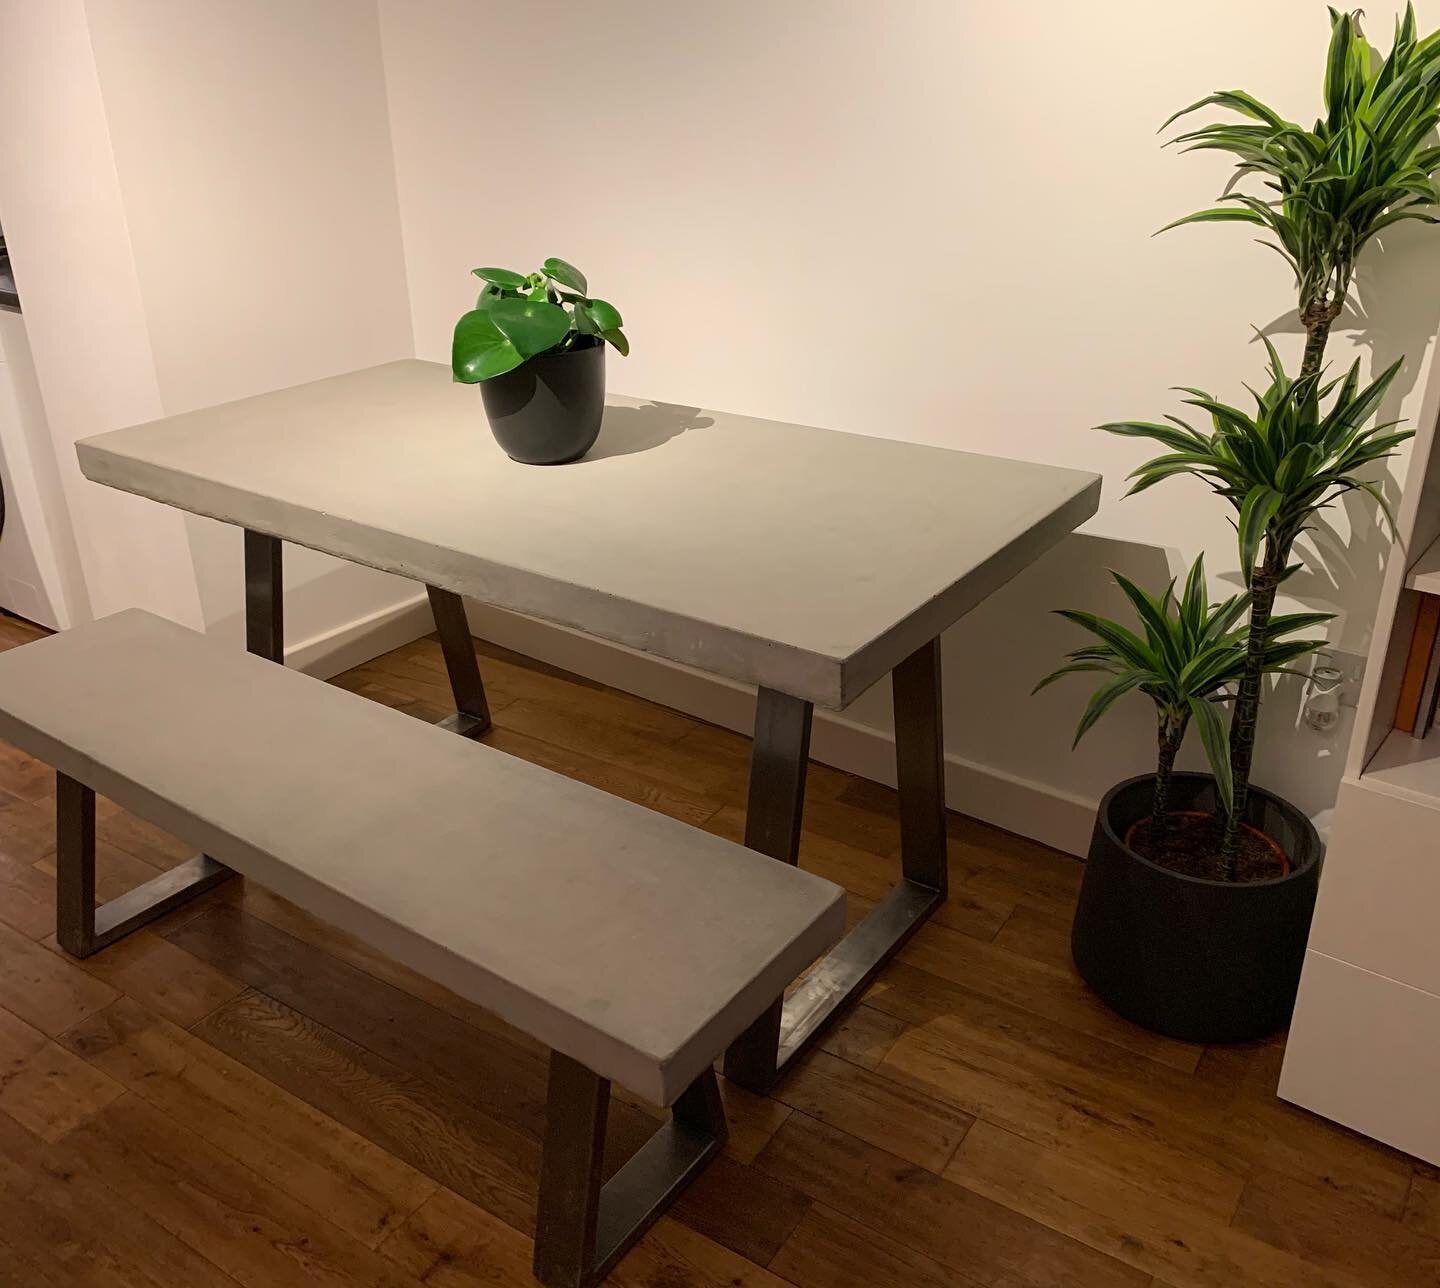 Another concrete dining table &amp; bench delivered to its new home in East London ✌🏾

Had a lot of fun working with Alex to create something bespoke for his kitchen living space. A natural concrete finish with industrial steel legs ✔️

Give us a sh